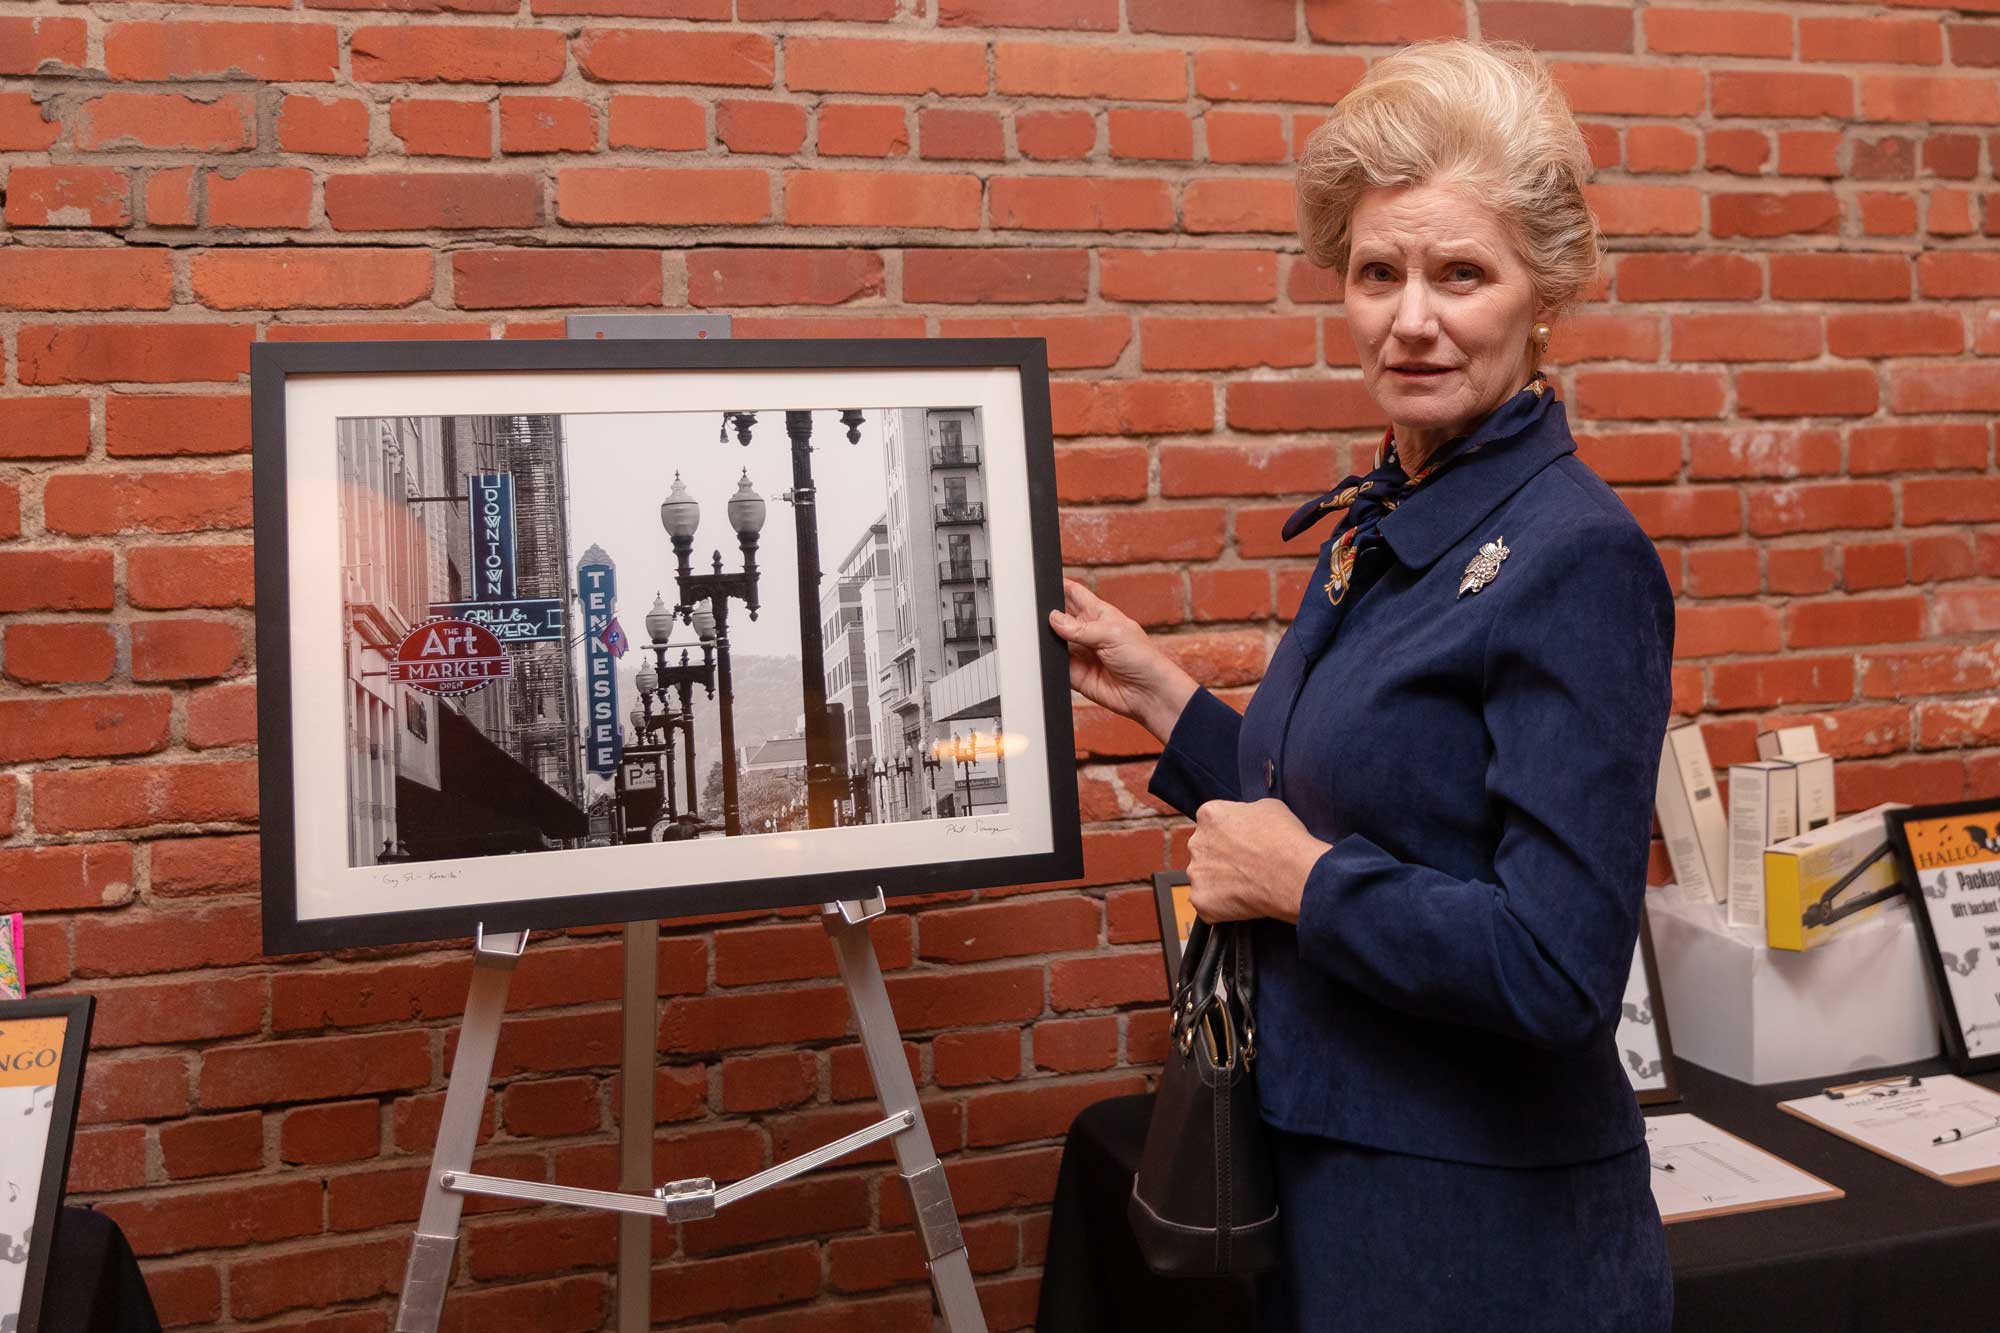 A woman in a suit standing next to a framed photograph.